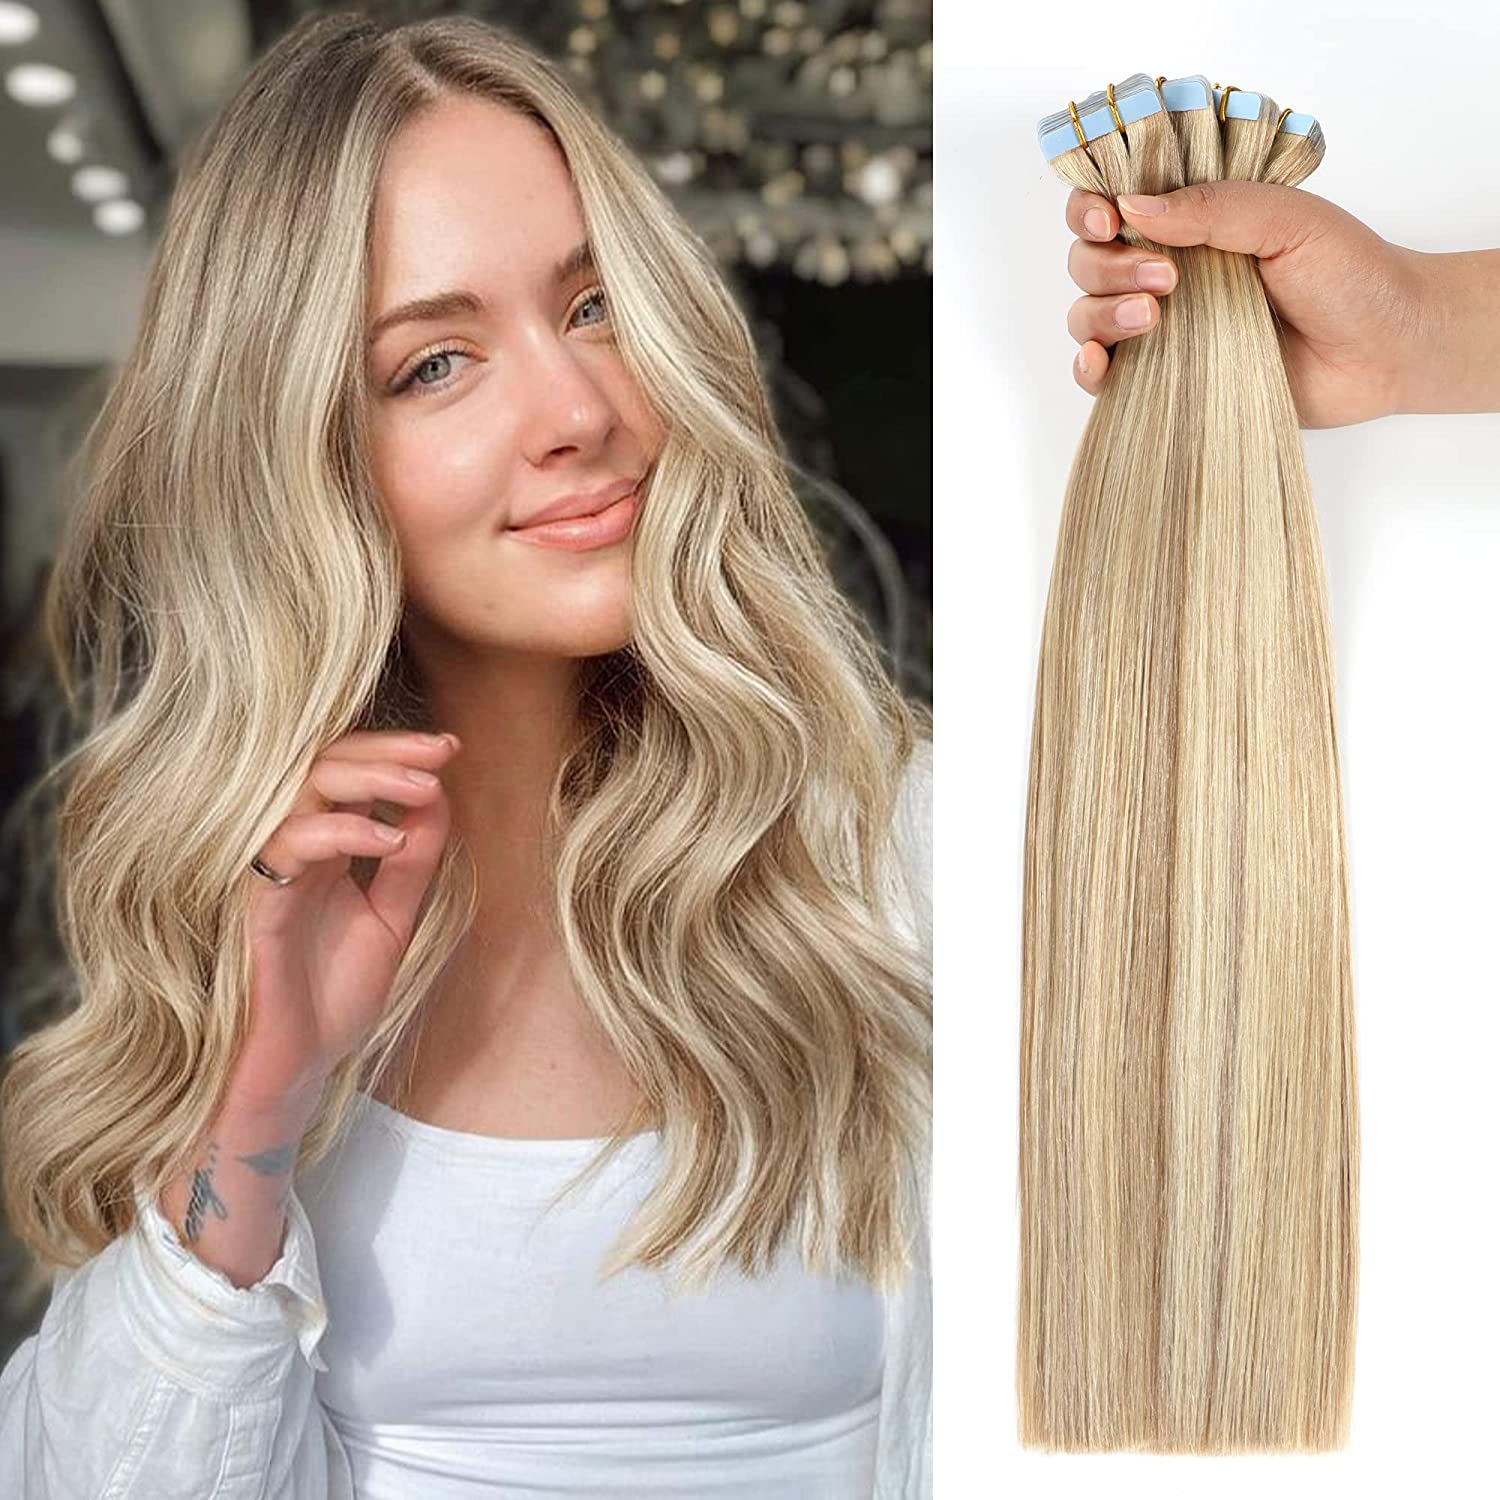 YILITE Tape in Hair Extensions Human Hair Ash Blonde Highlighted Bleach Blonde 14inch-20 inch 20pcs 50g/pack Straight Seamless Skin Weft 100% Real Human Hair